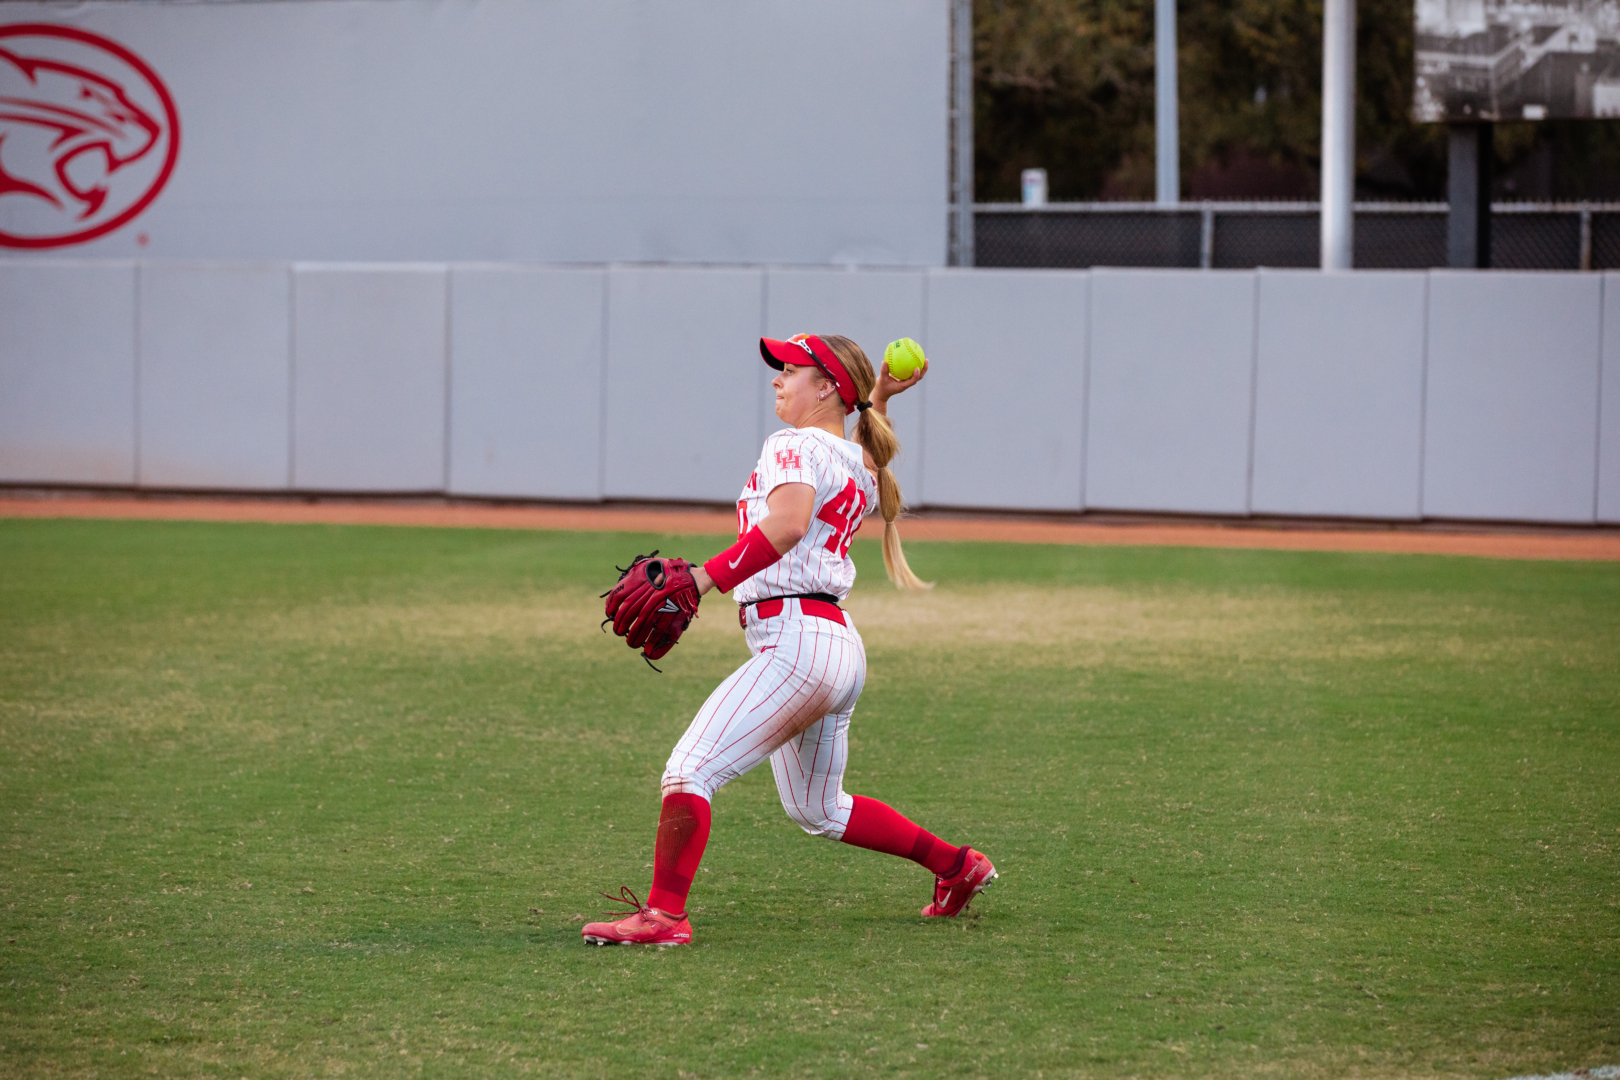 UH softball dropped to 9-7 on the season after falling to Texas A&M on Wednesday night. | Oscar Herrera/The Cougar